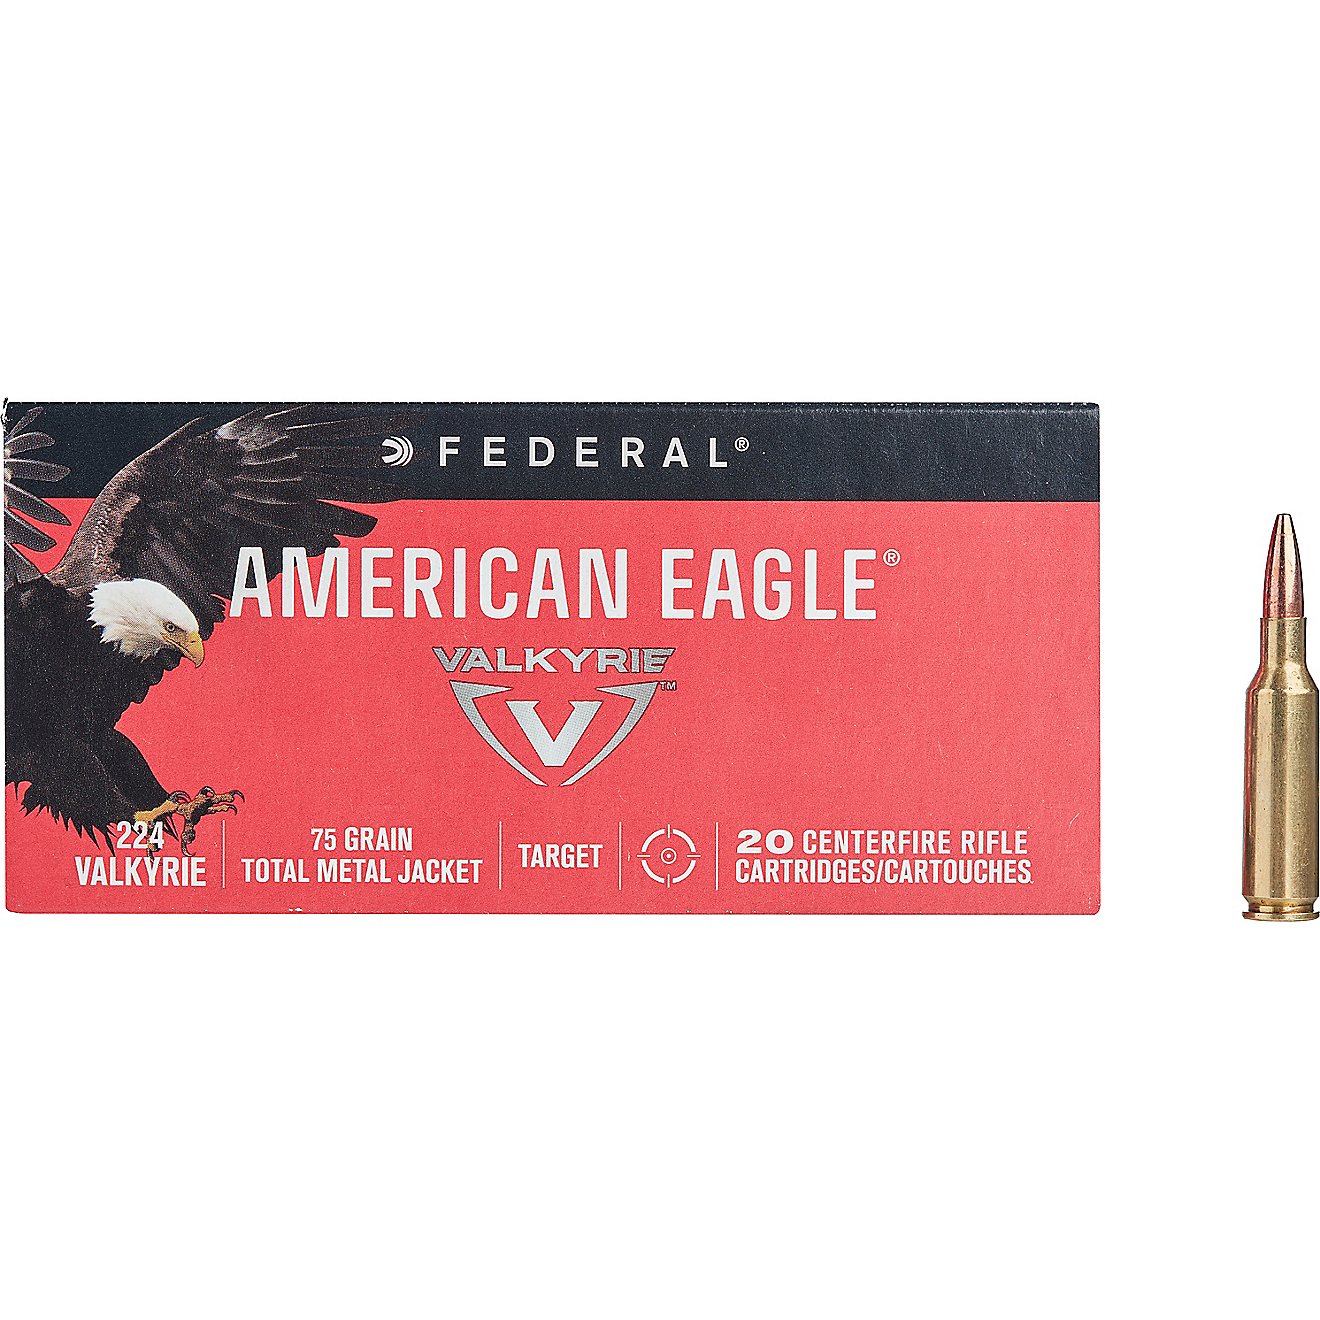 Federal Premium American Eagle .224 Valkyrie 75 Grain TMJ Rifle Ammunition - 20 Rounds                                           - view number 2